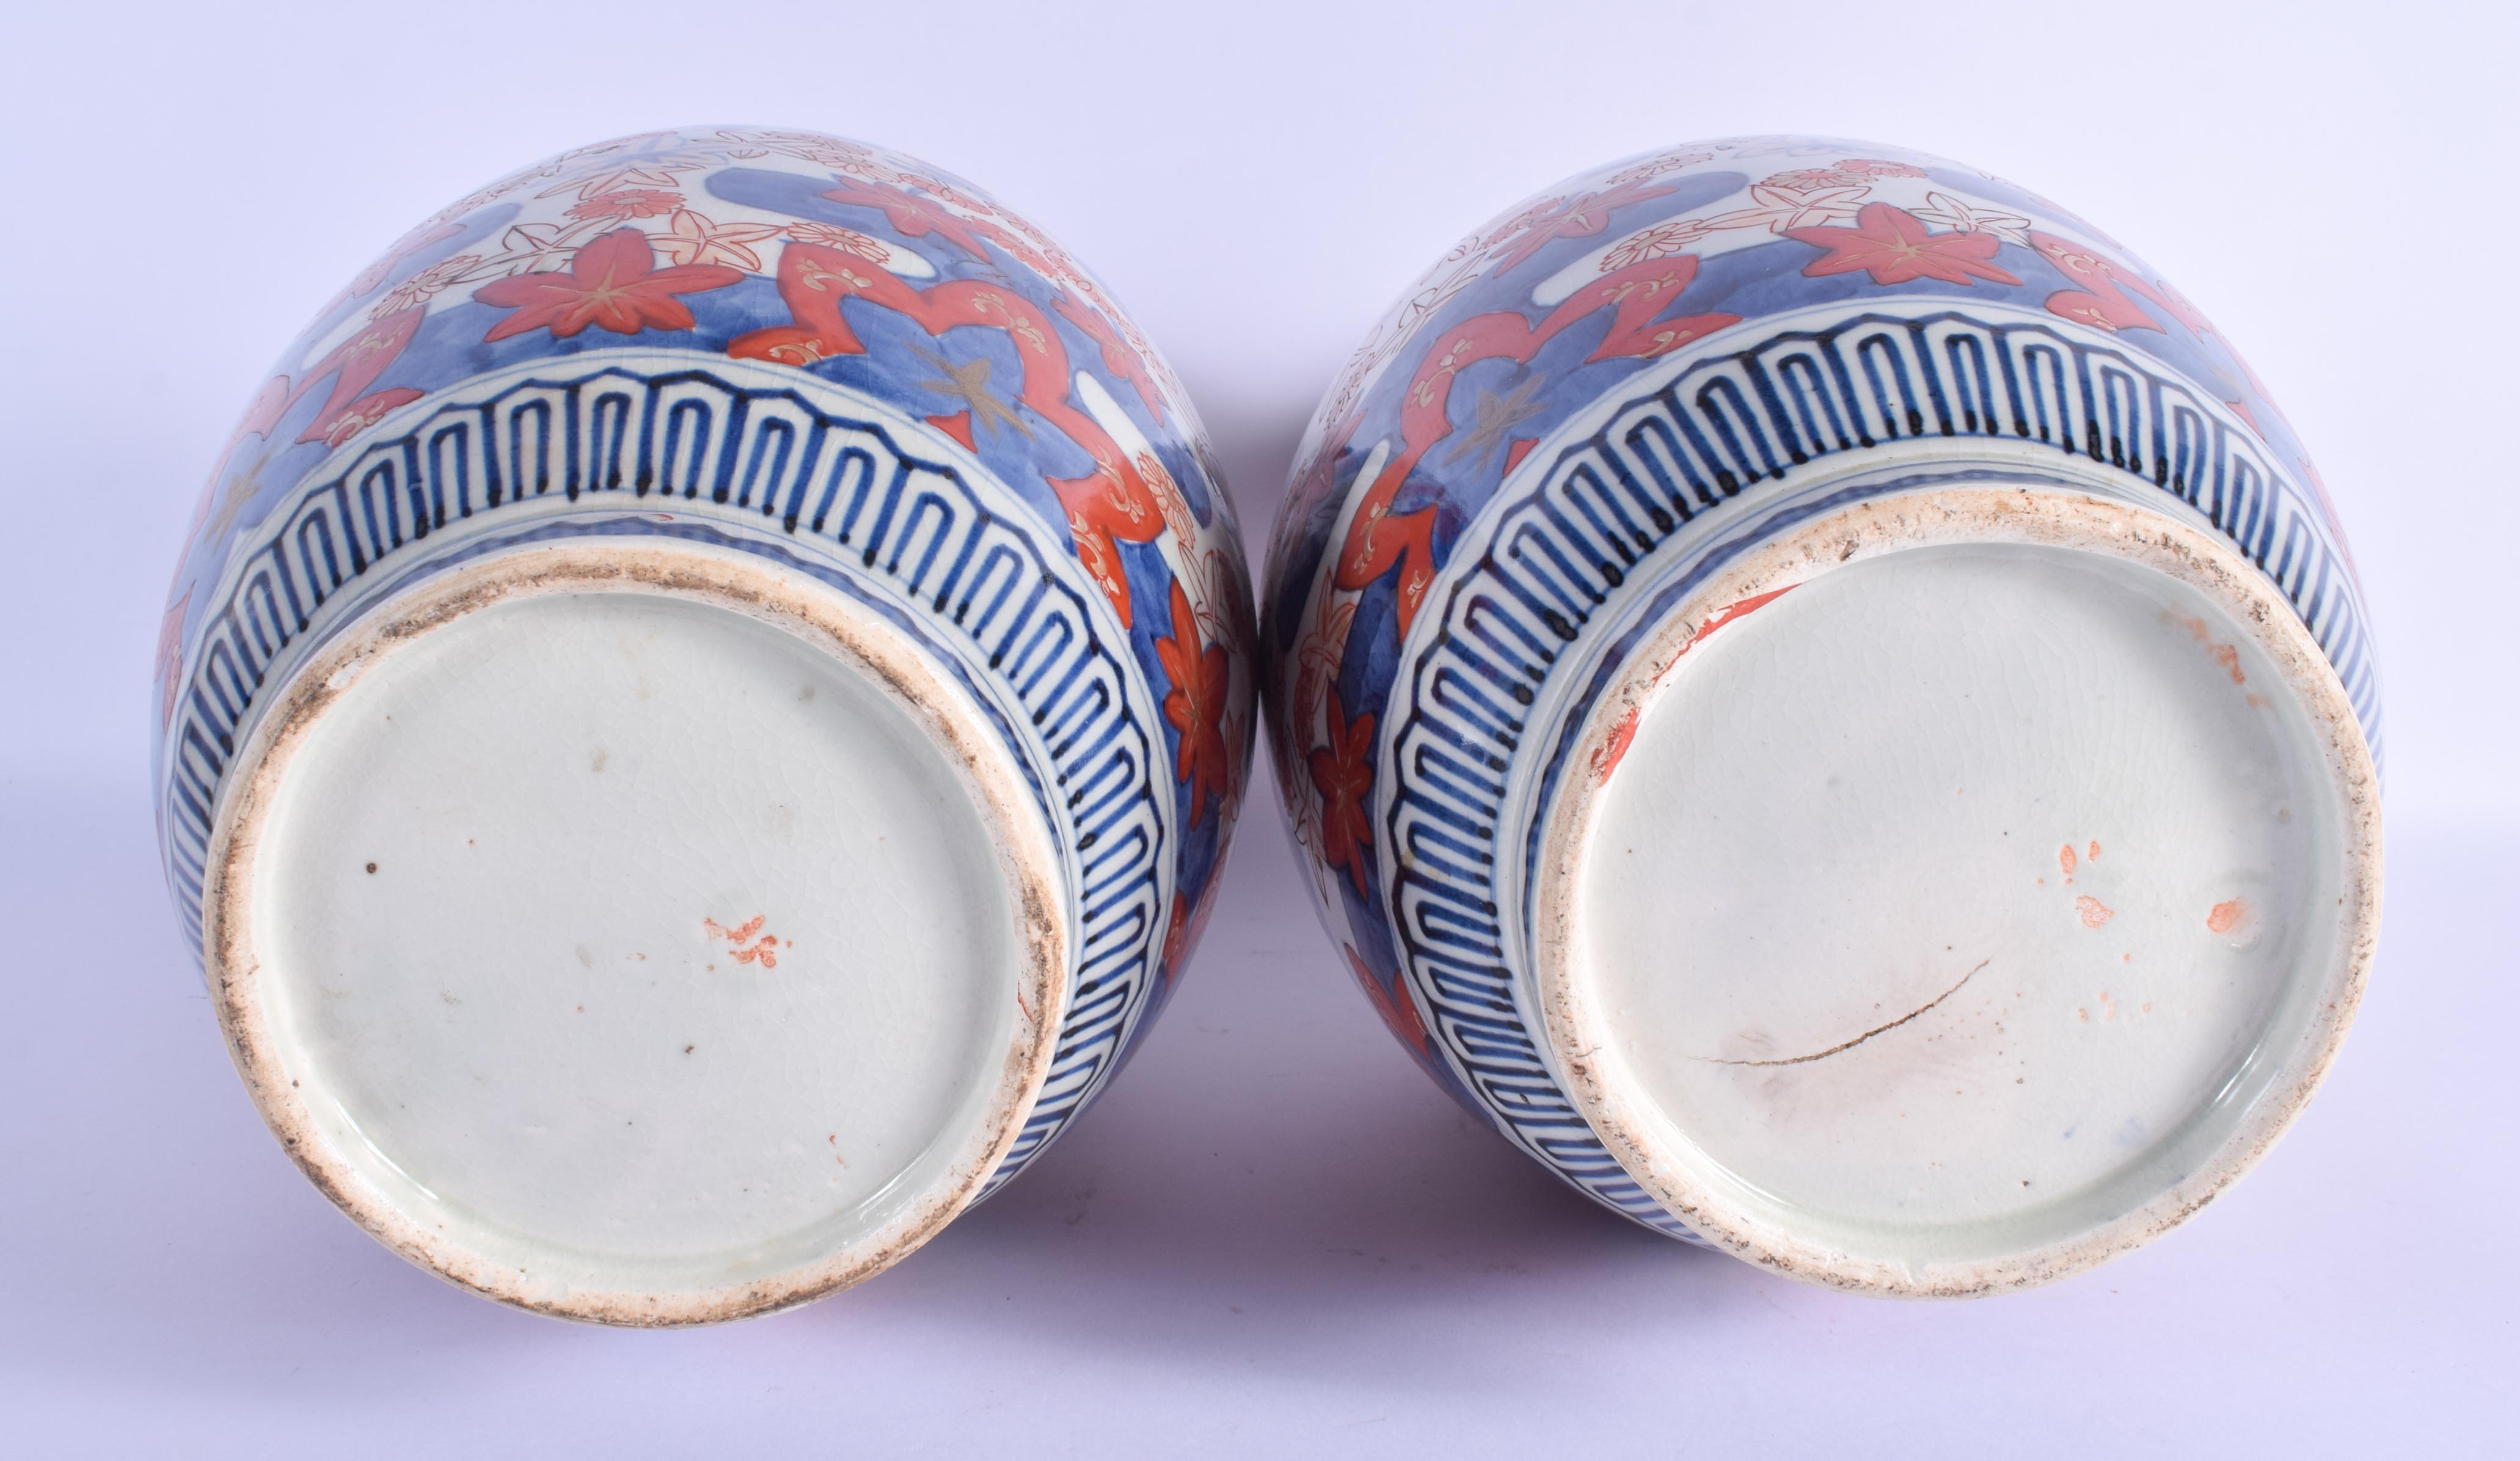 A LARGE PAIR OF 19TH CENTURY JAPANESE MEIJI PERIOD IMARI VASES painted with flowers. 37 cm x 15 cm. - Image 3 of 3